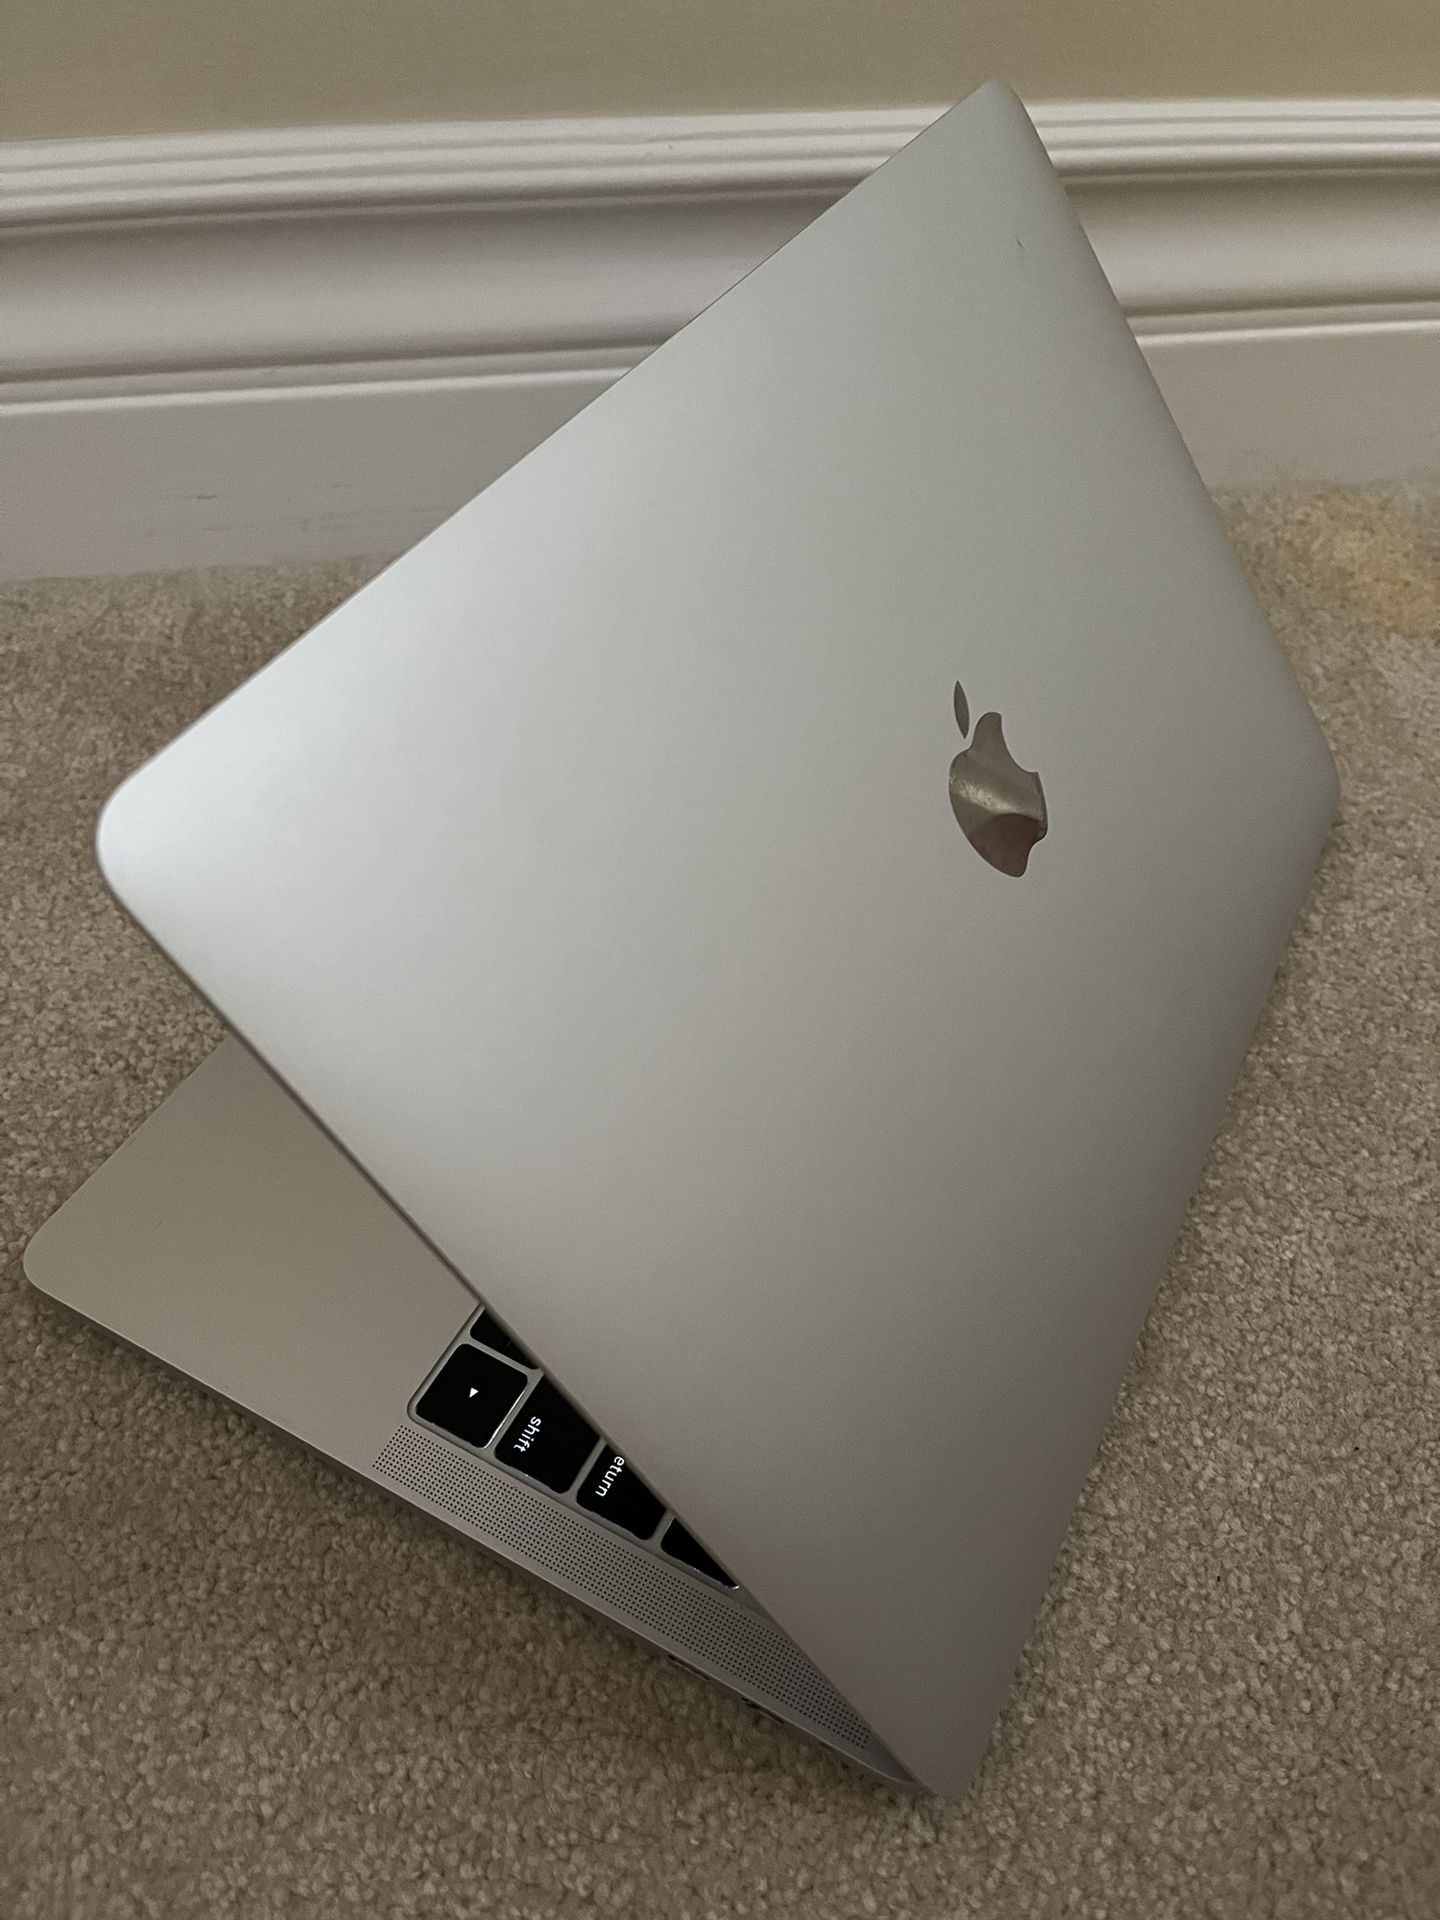 Great 2019 MacBook Pro A1989,i7-2.7Ghz,16Gb,512Gb,AC Charger